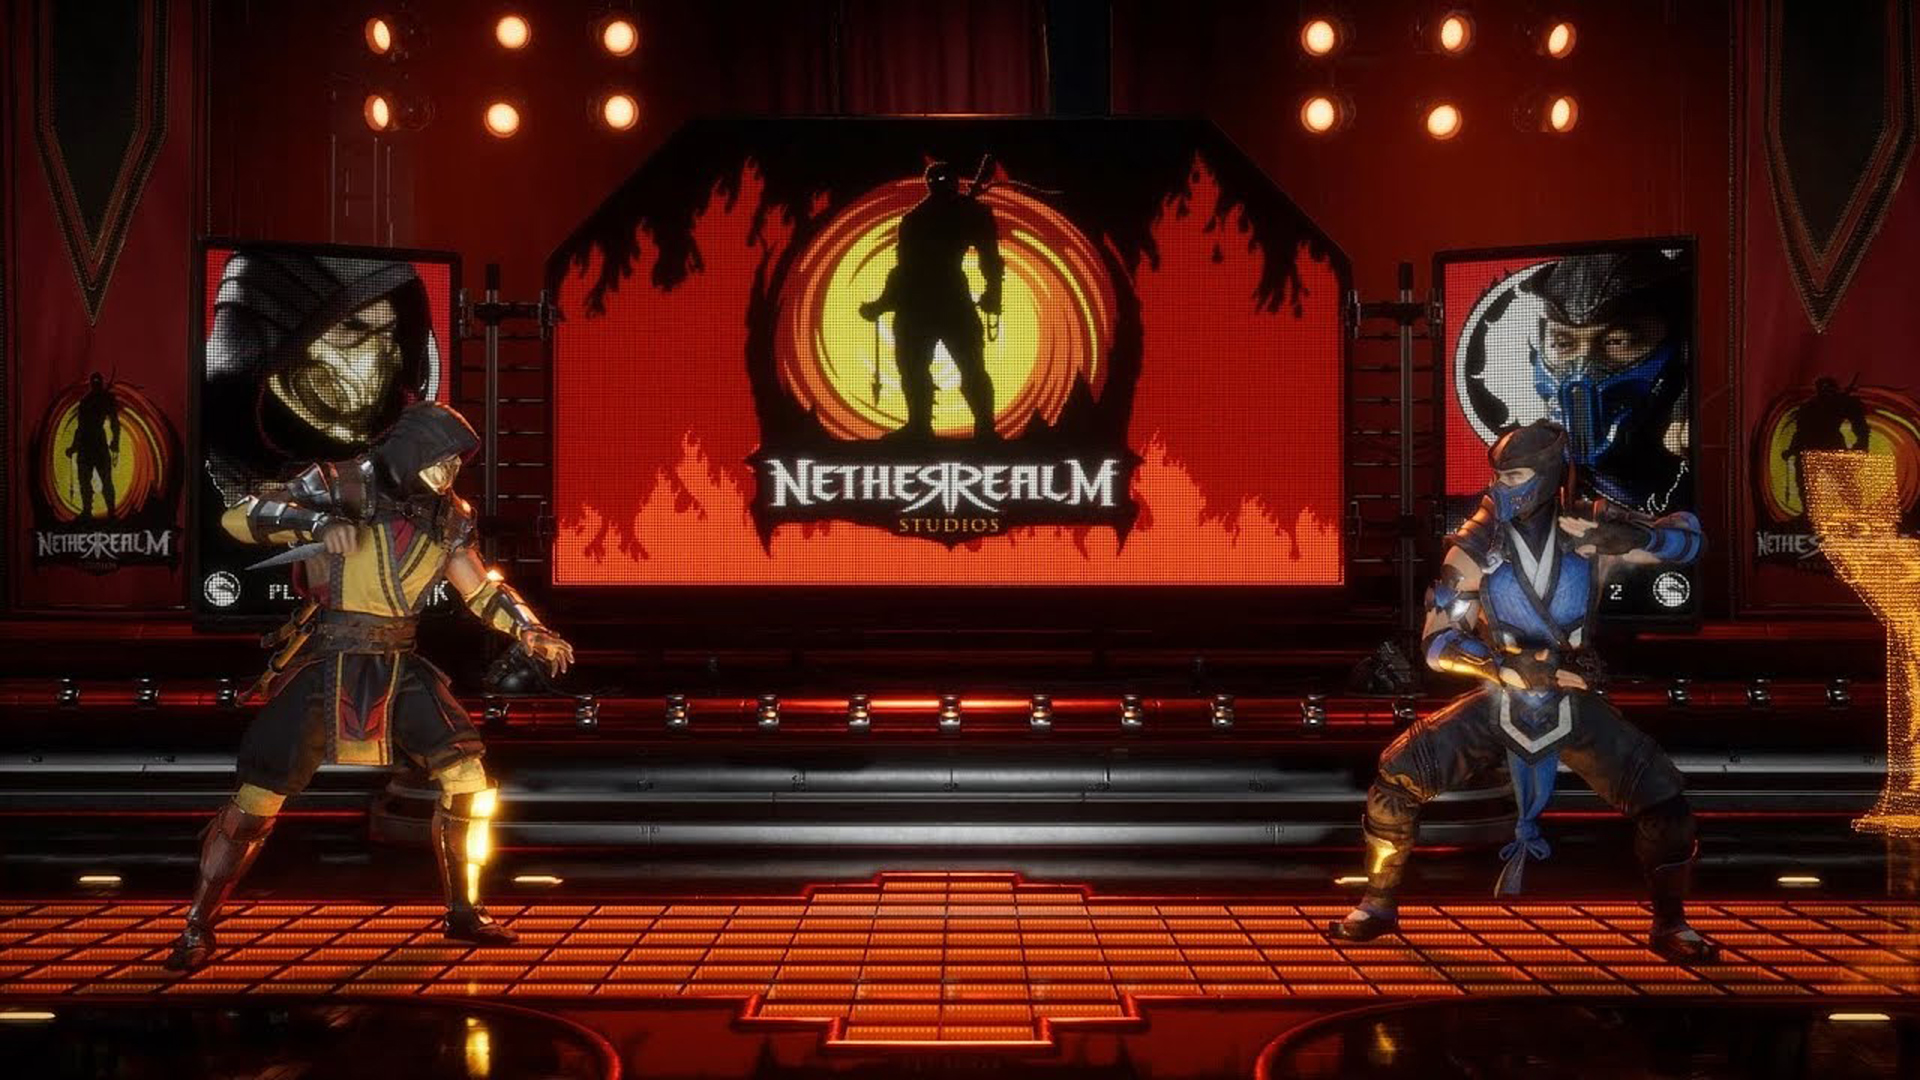 Set the Stage: MK11 Aftermath Stage Fatality Guide